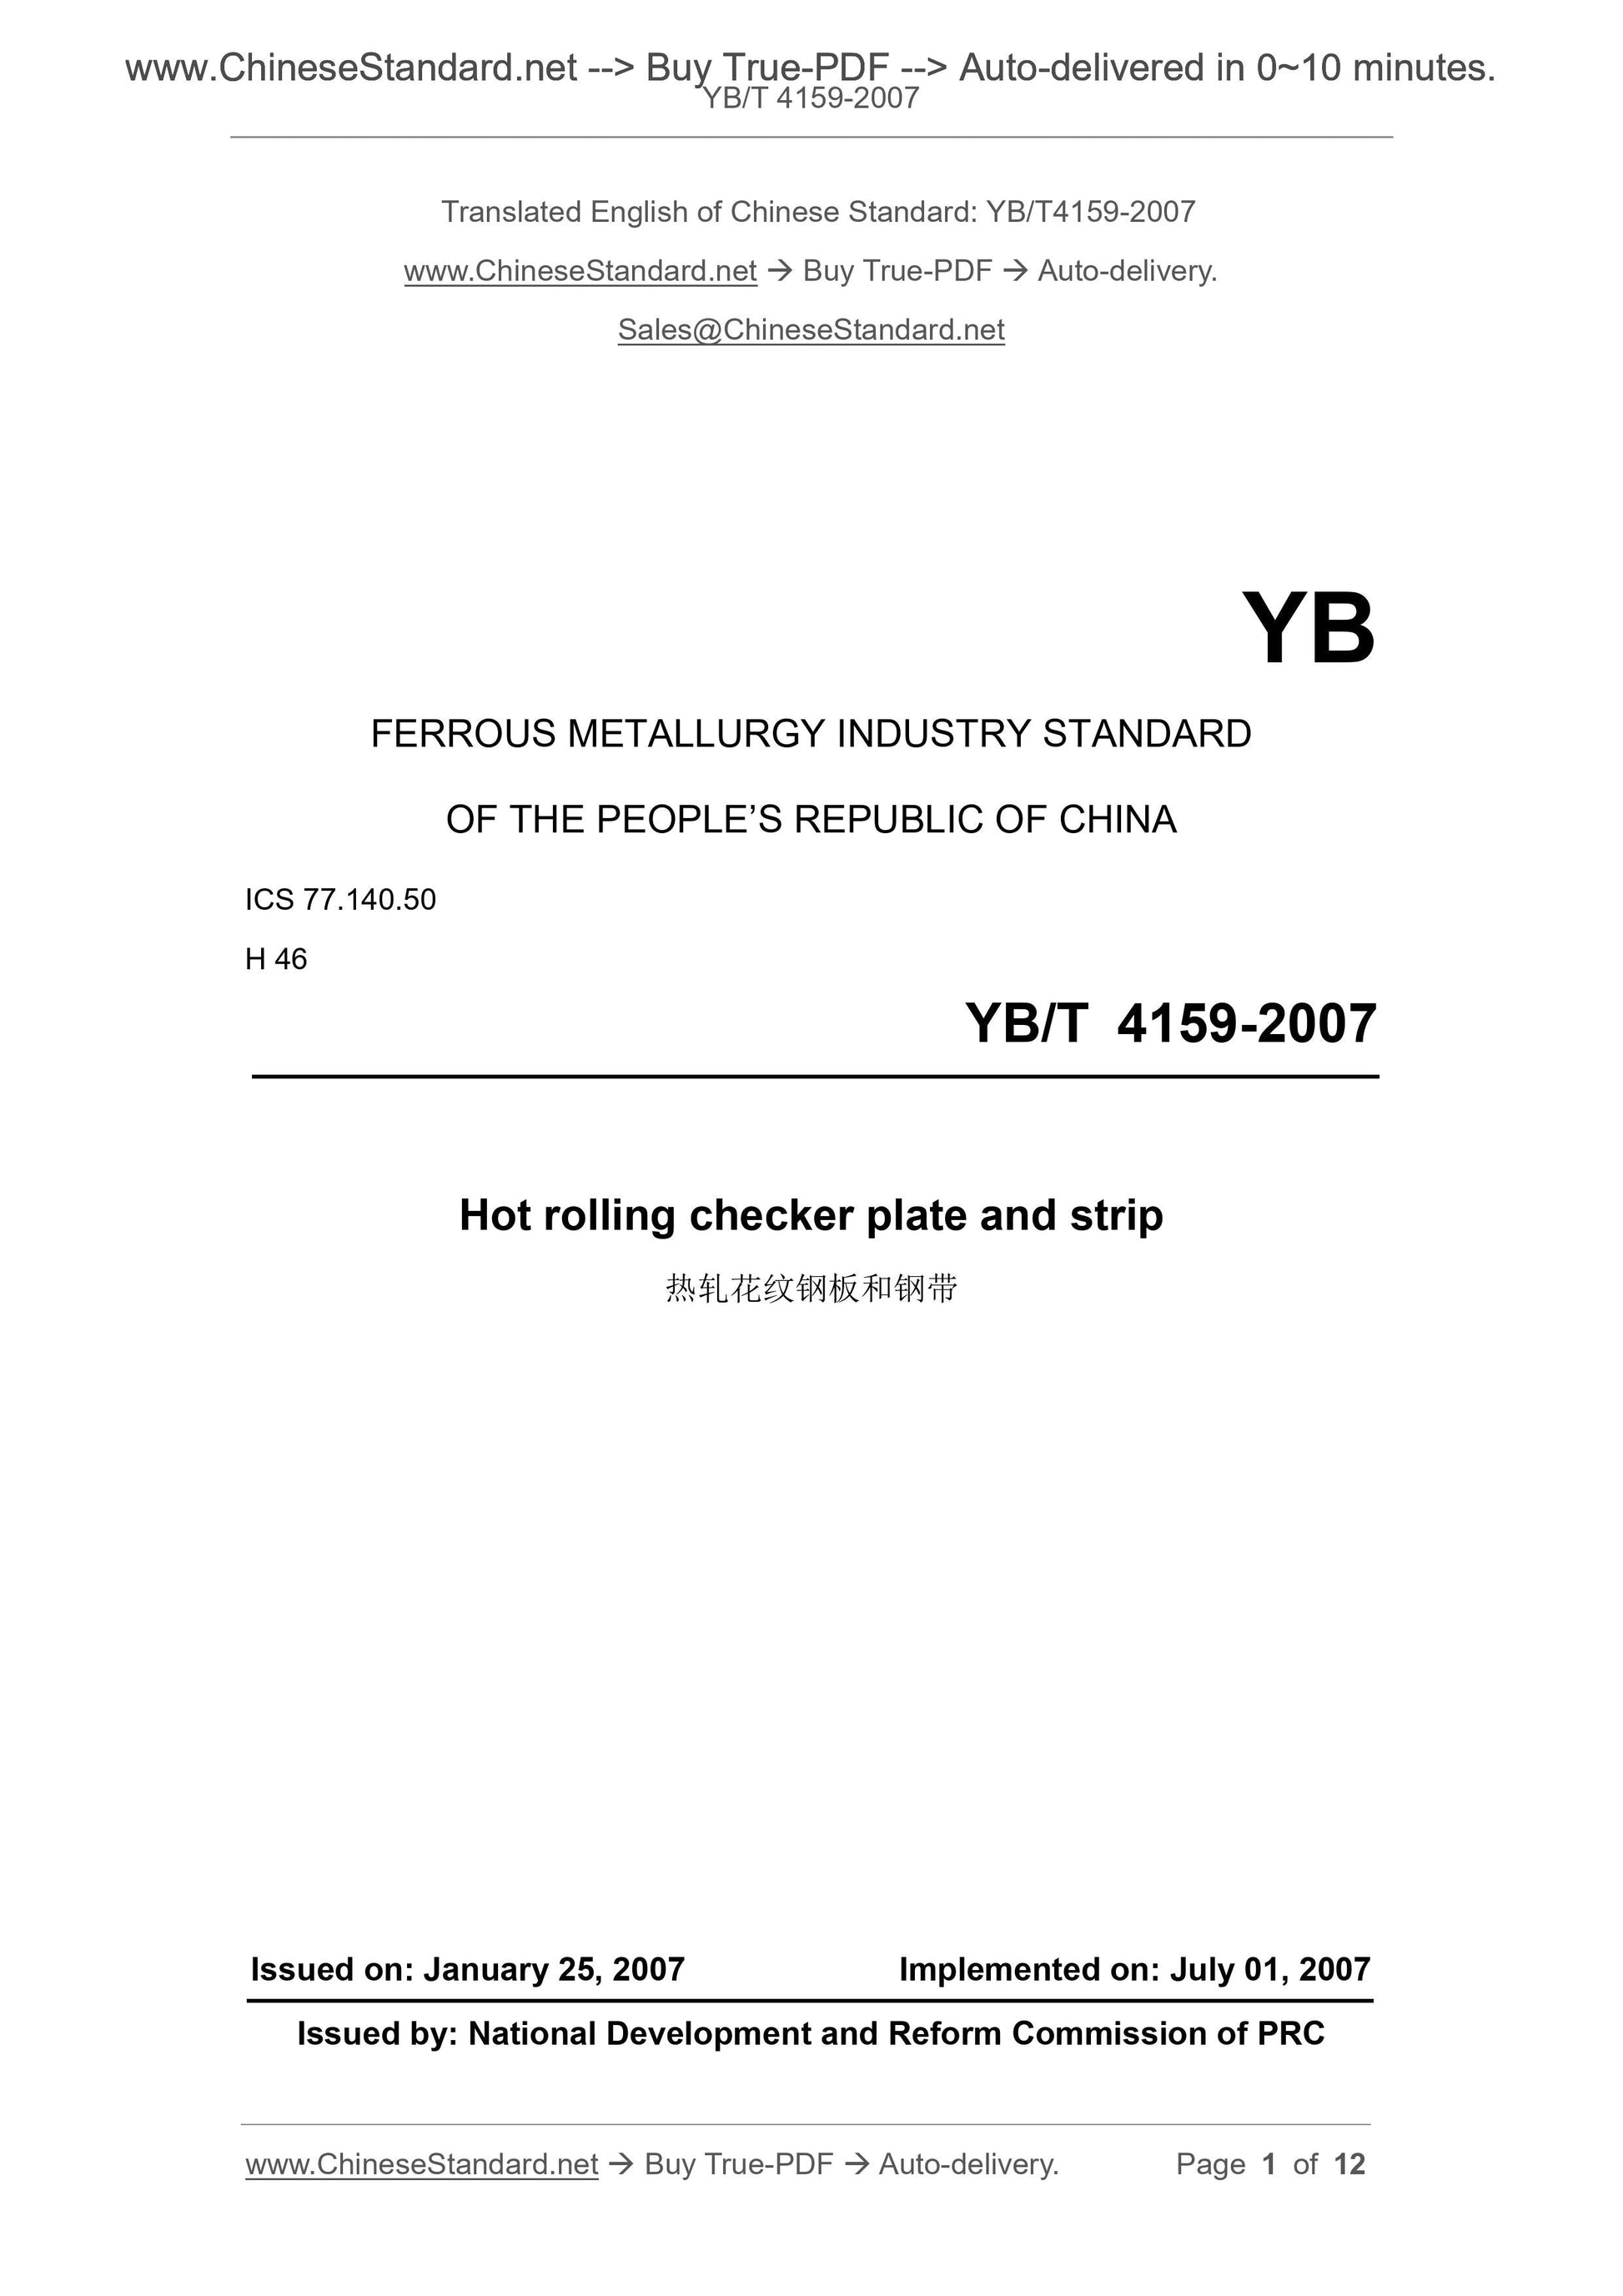 YB/T 4159-2007 Page 1